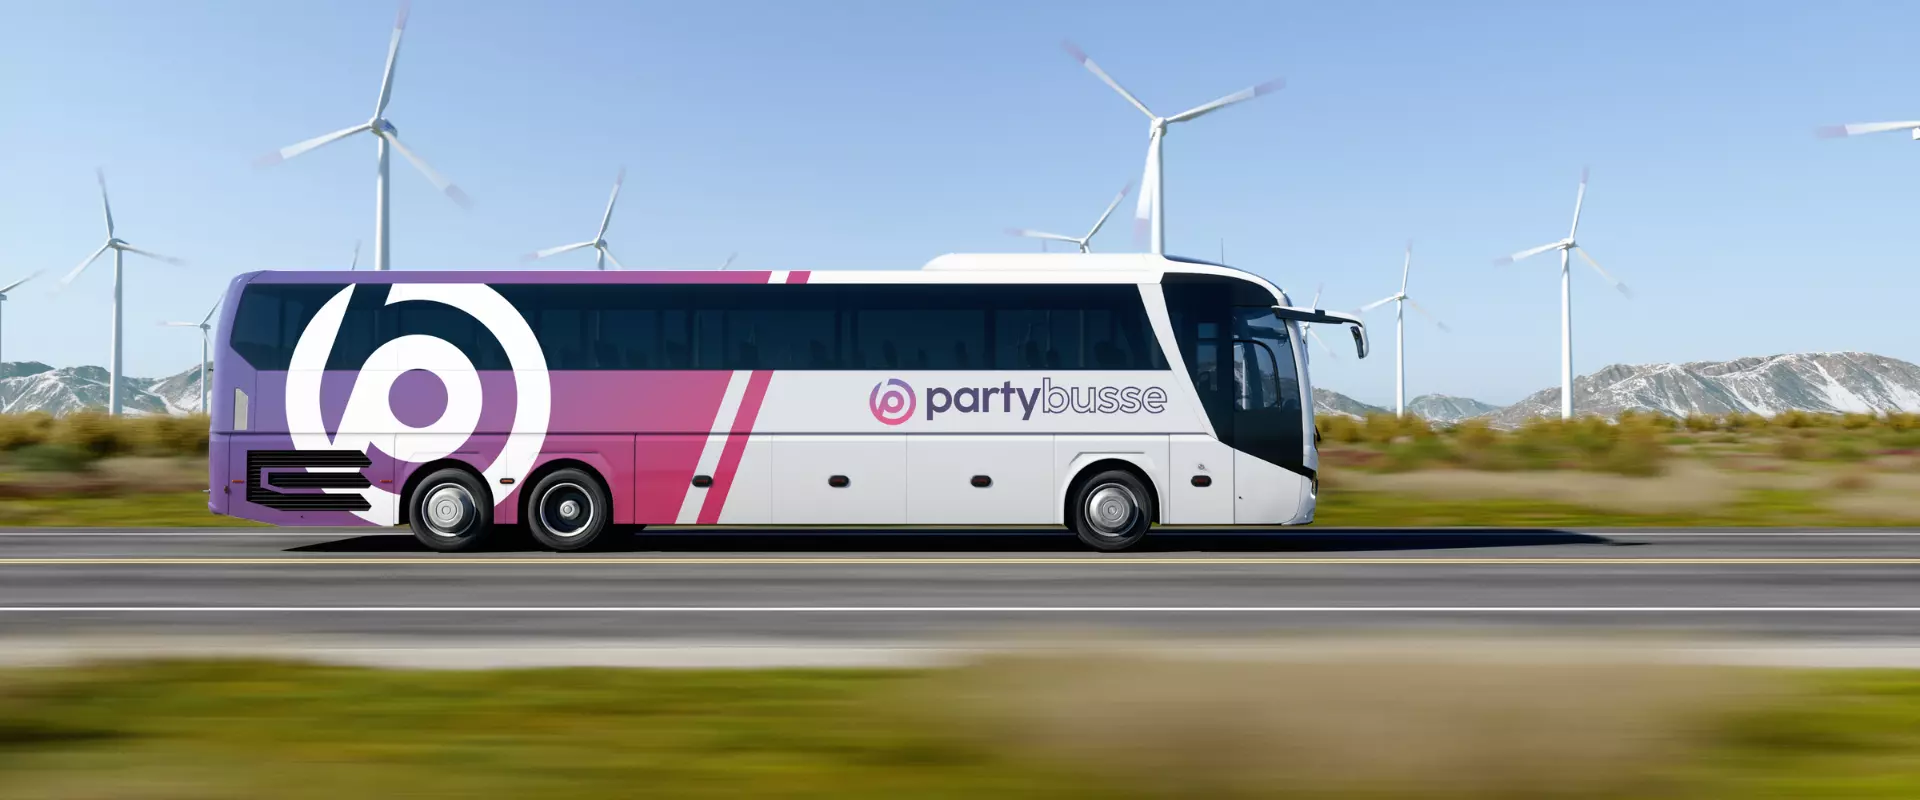 Partybusse - Wiki